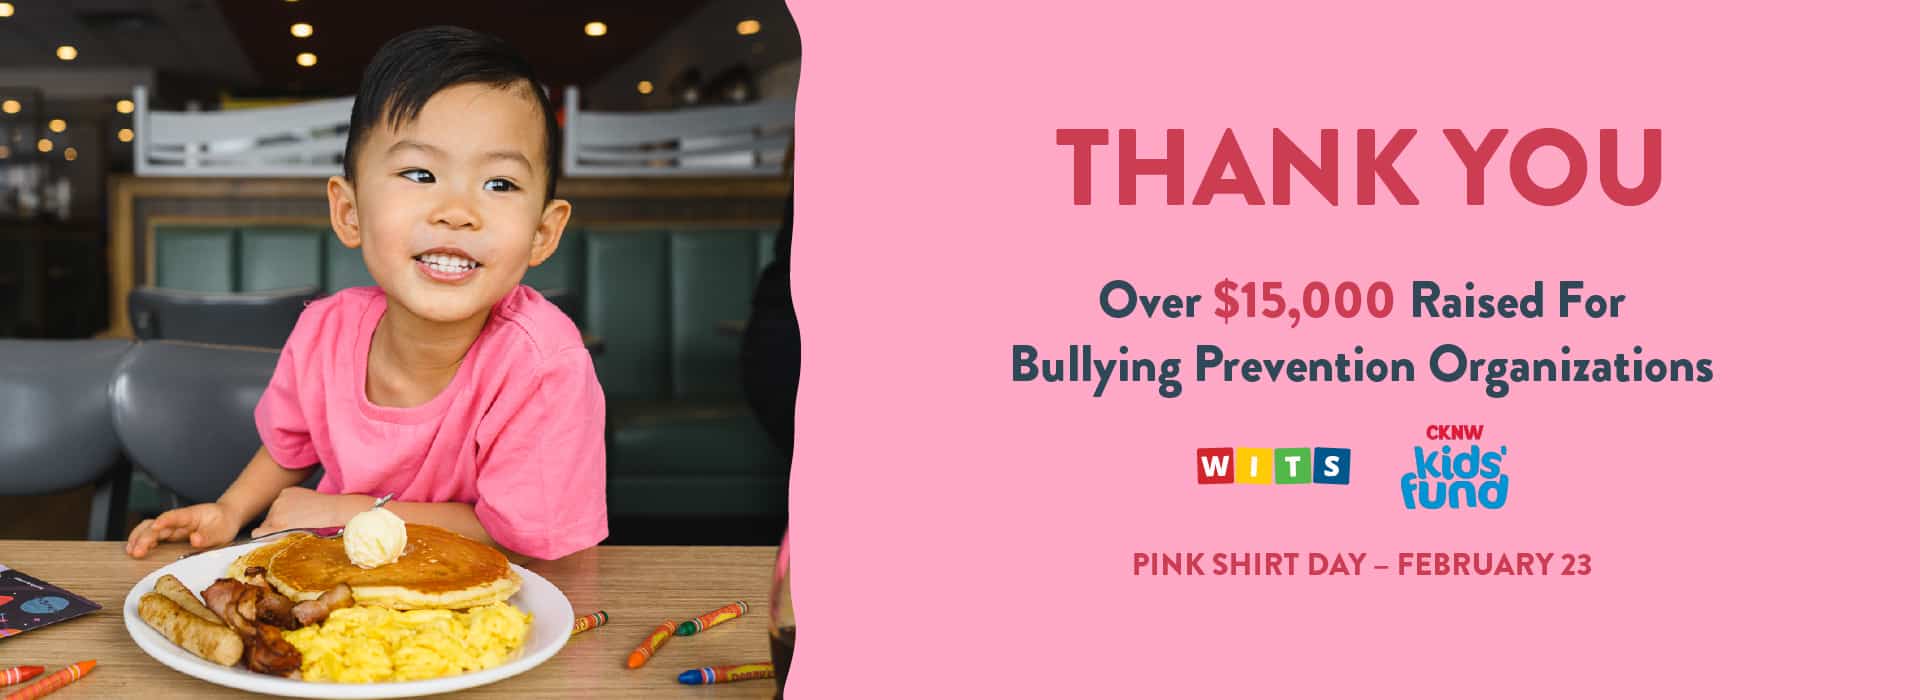 THANK YOU – Over $15,000 Raised For Bullying Prevention